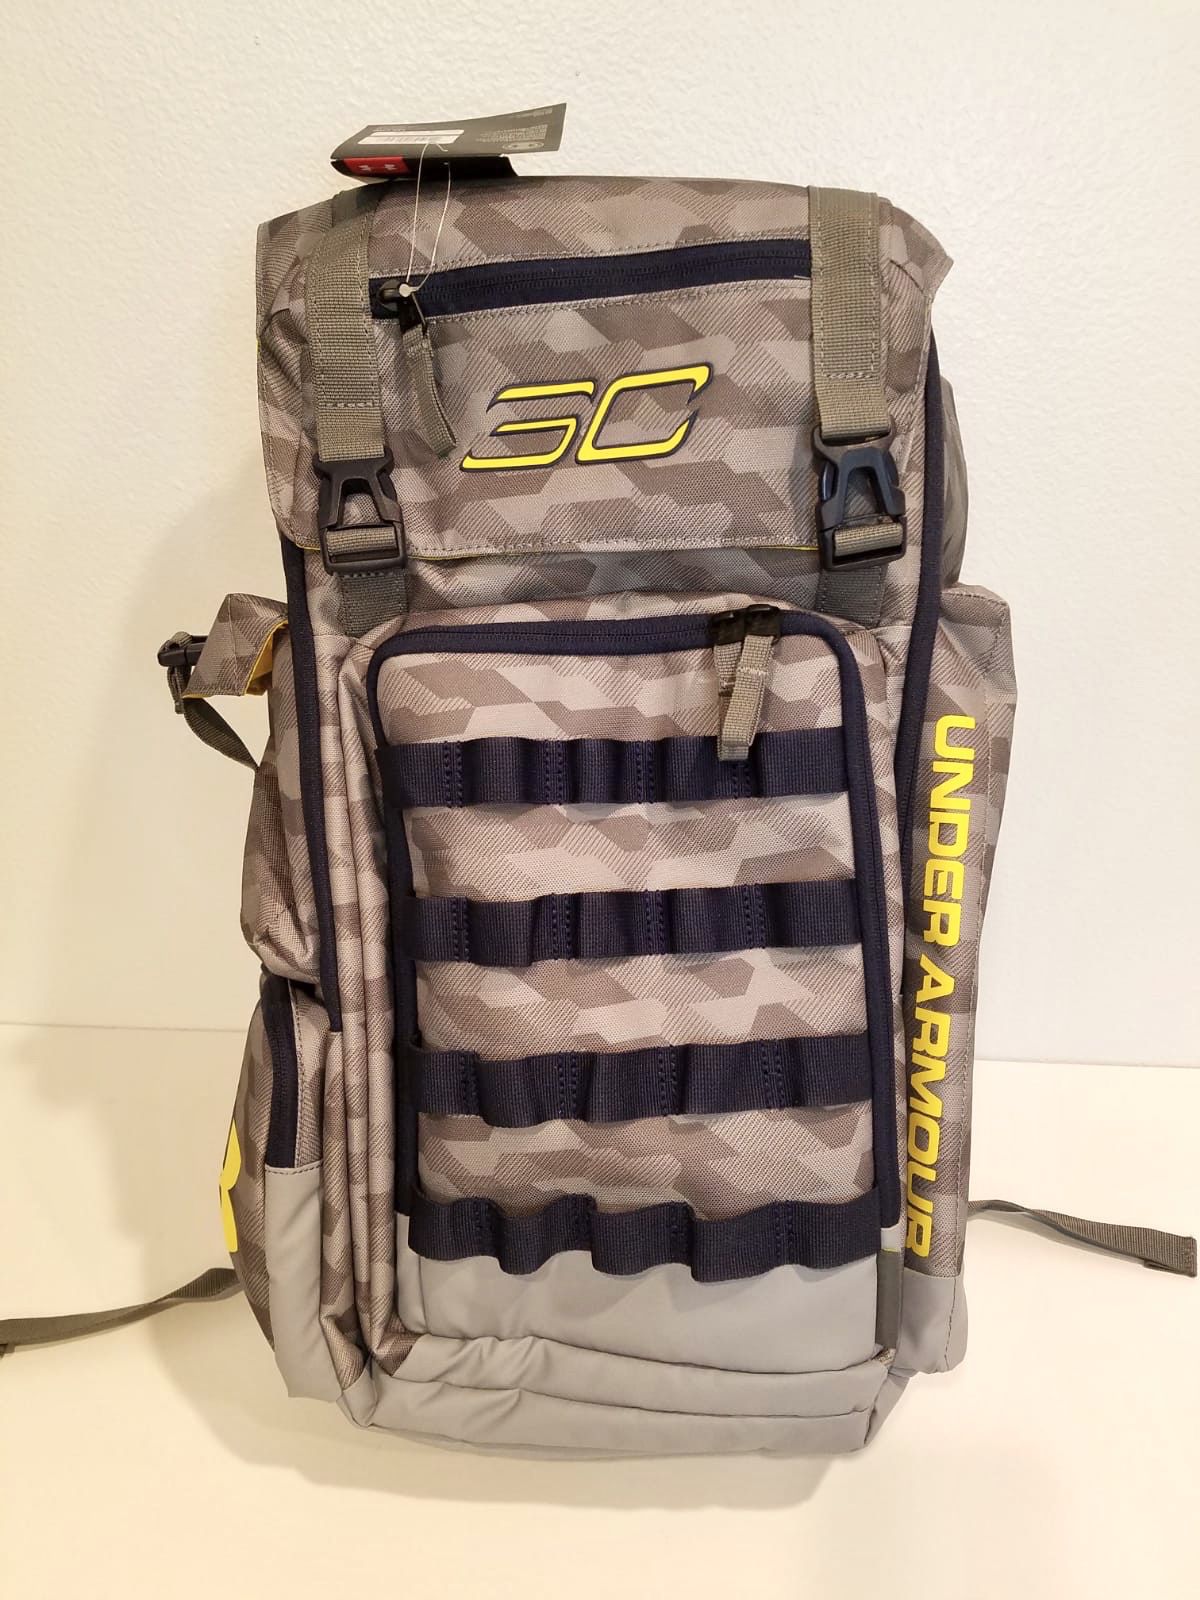 Maestría Poesía Constituir Under Armour SC30 UA SC Undeniable Backpack Basketball Bag NWT 1262140 009  for Sale in Cypress, CA - OfferUp